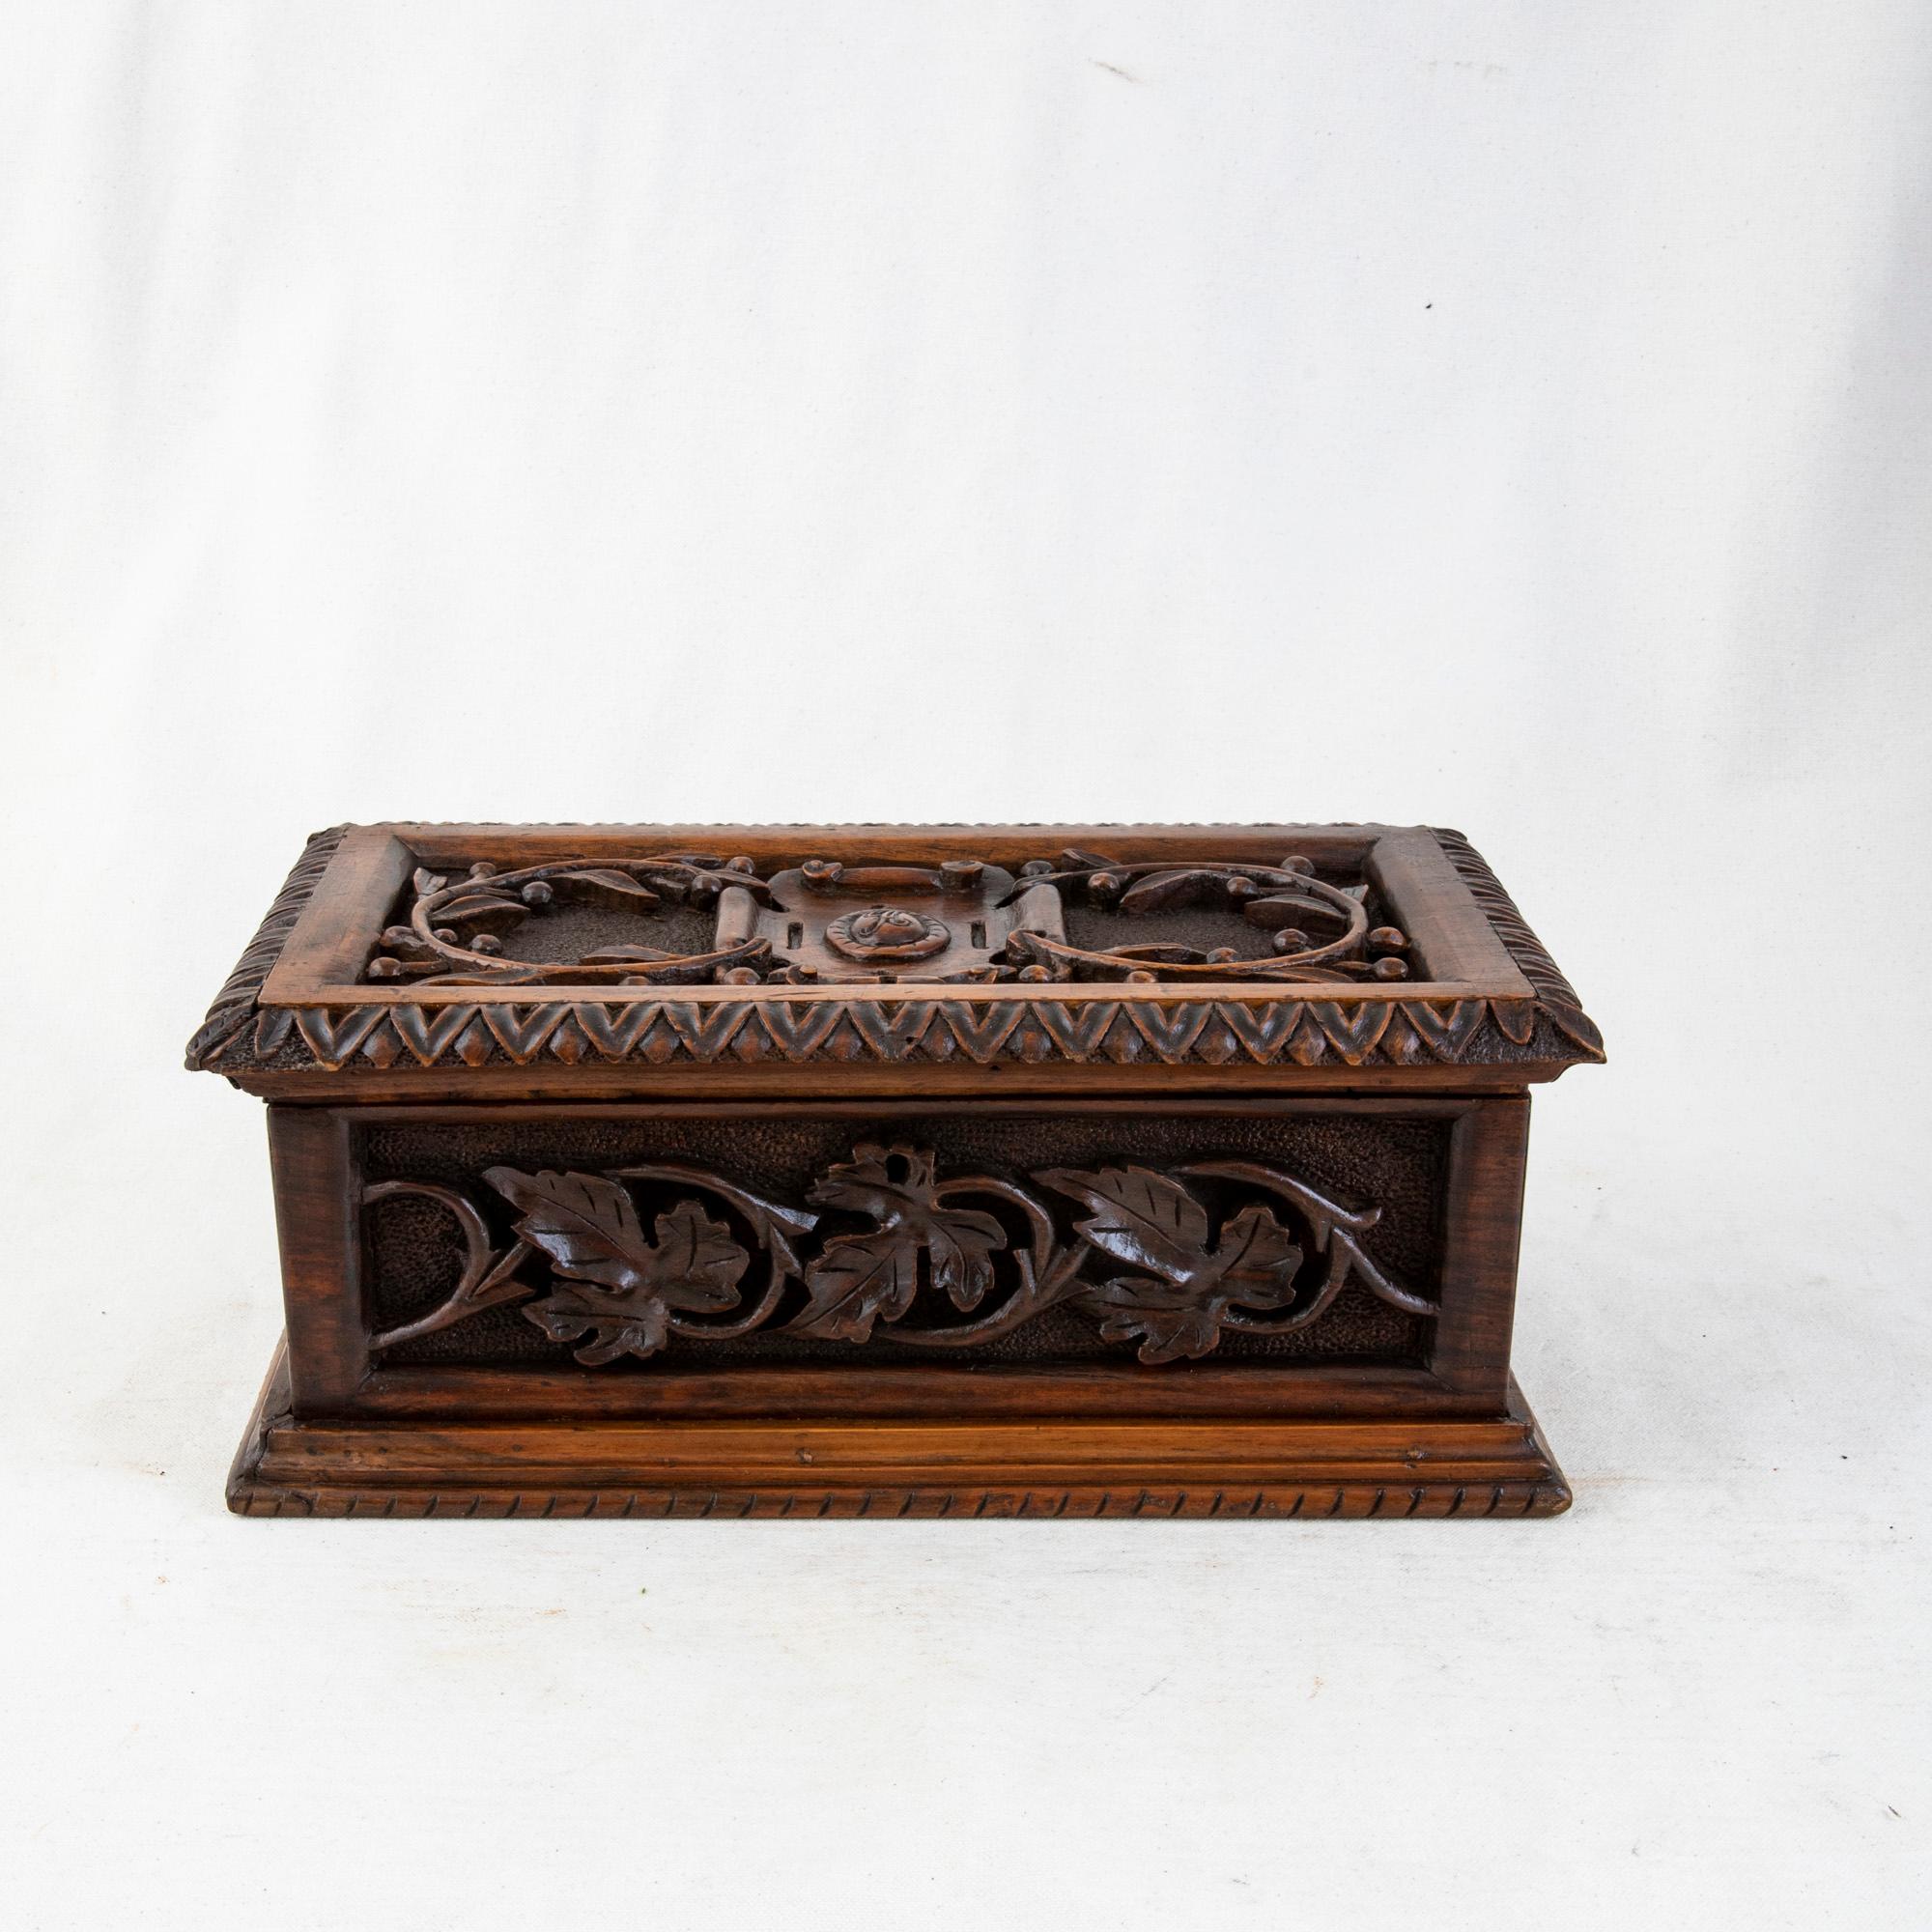 Measuring 12.25 inches wide by 6.5 inches deep, this large French hand carved box from the turn of the twentieth century features a central cartouche on the top monogrammed with the letter A flanked by olive branches. The top is trimmed with a